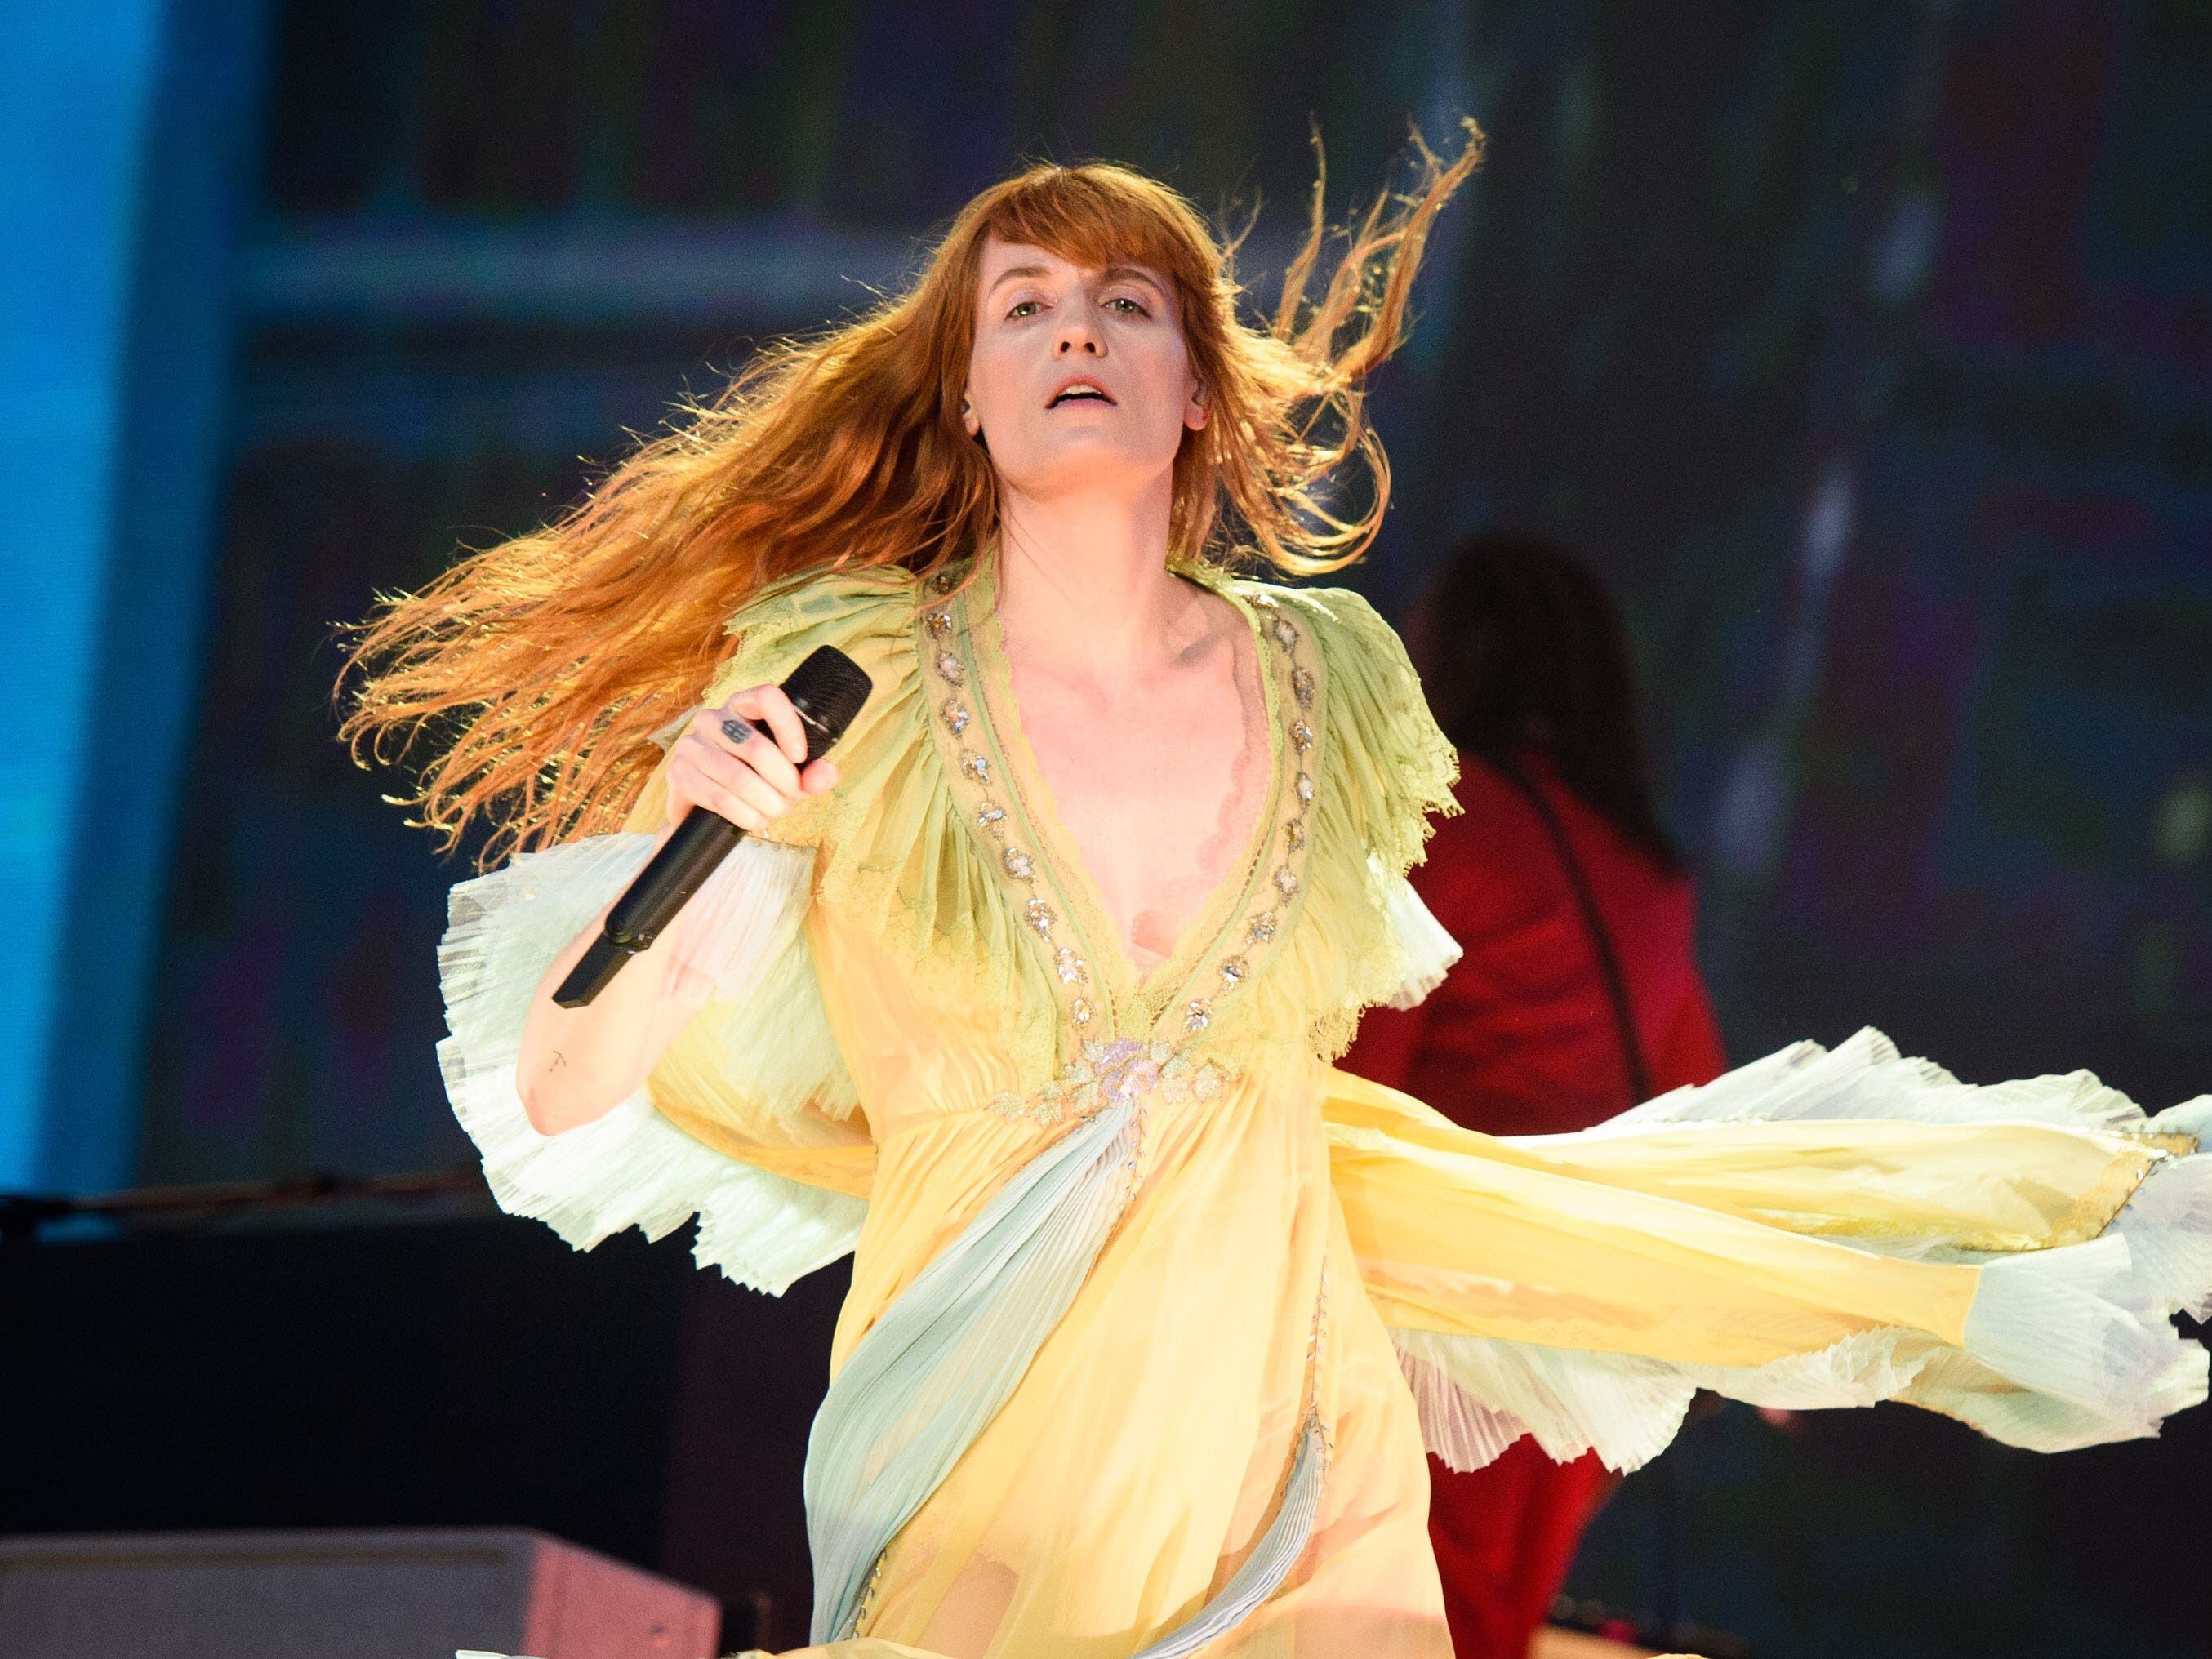 Florence + The Machine return with new music after almost two years